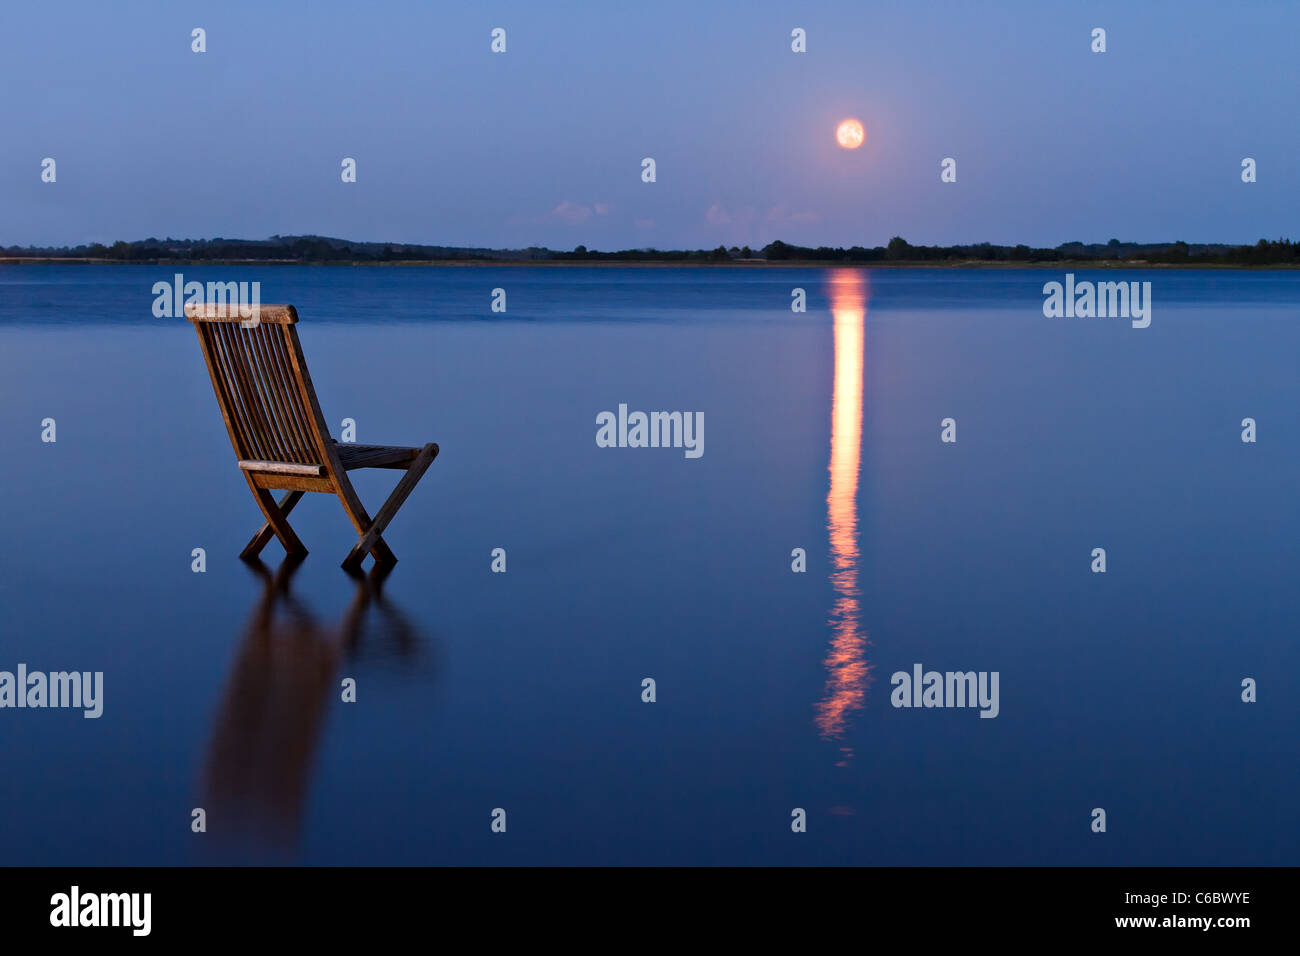 Singular chair in calm water facing the land in the horizon. With rising orange moon reflected in the blue water Stock Photo